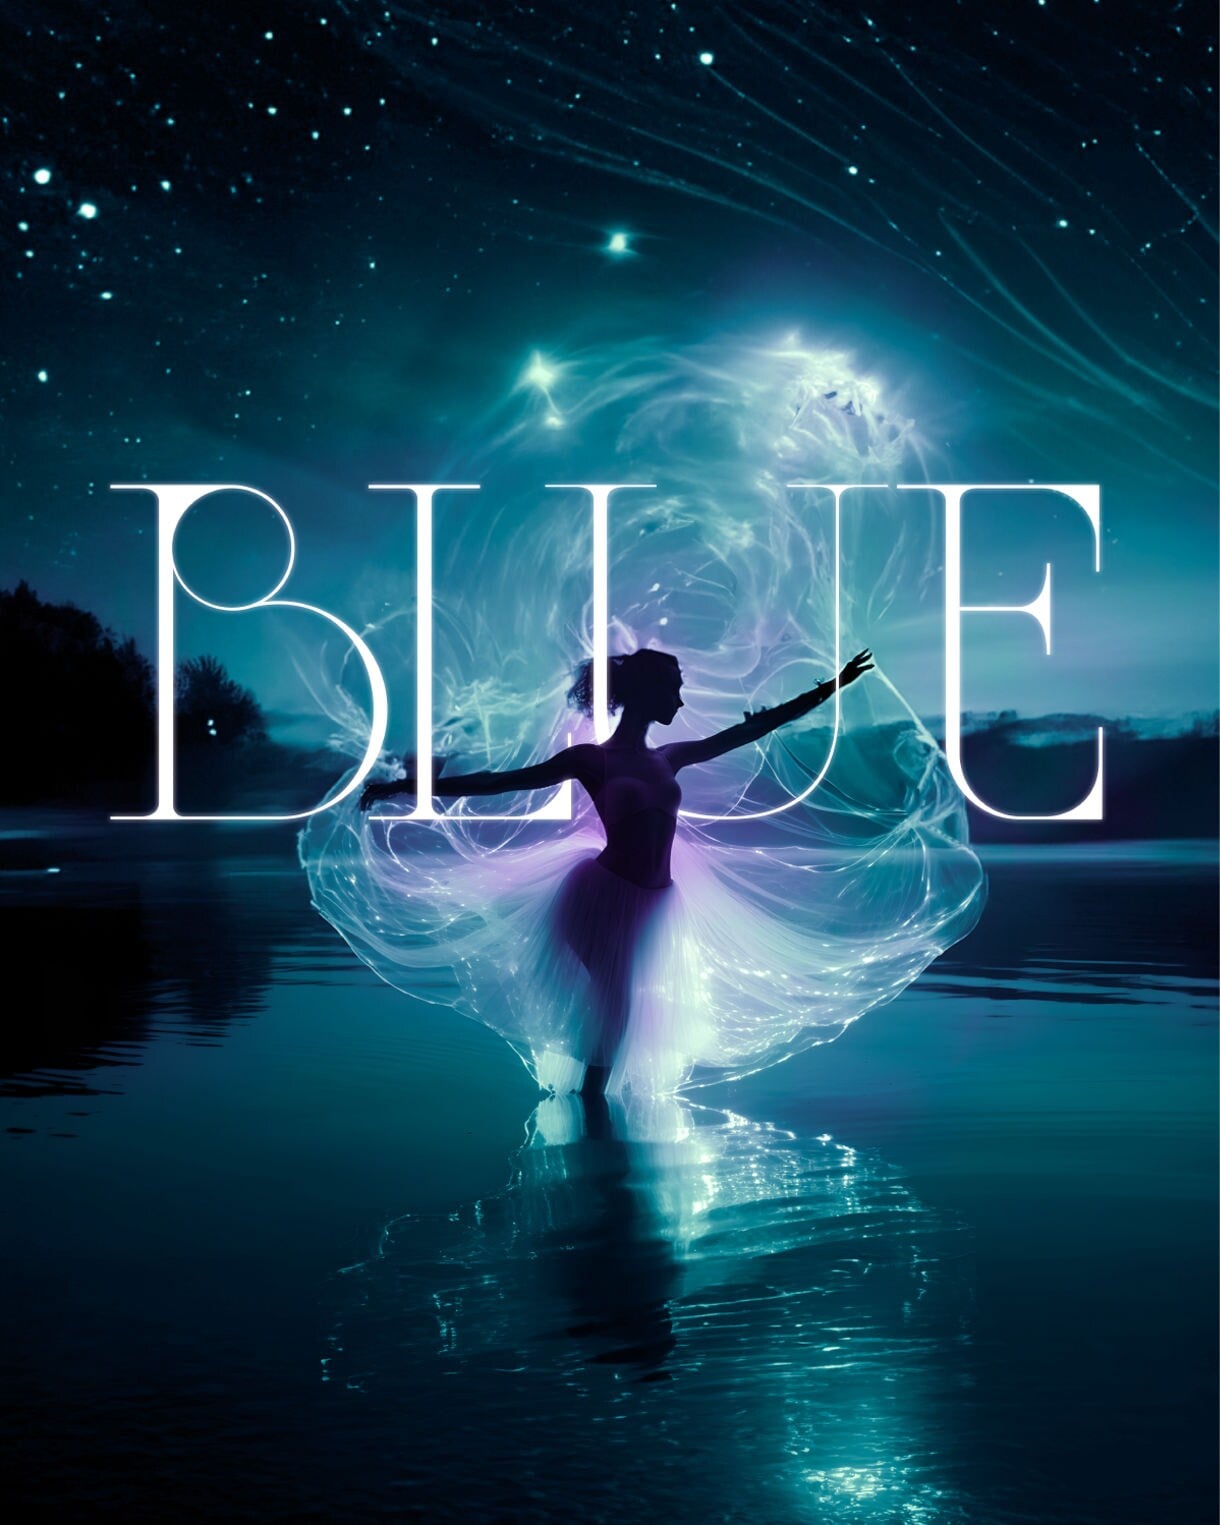 Blue: Get swept away by this dazzling world of color, emotion, and music.